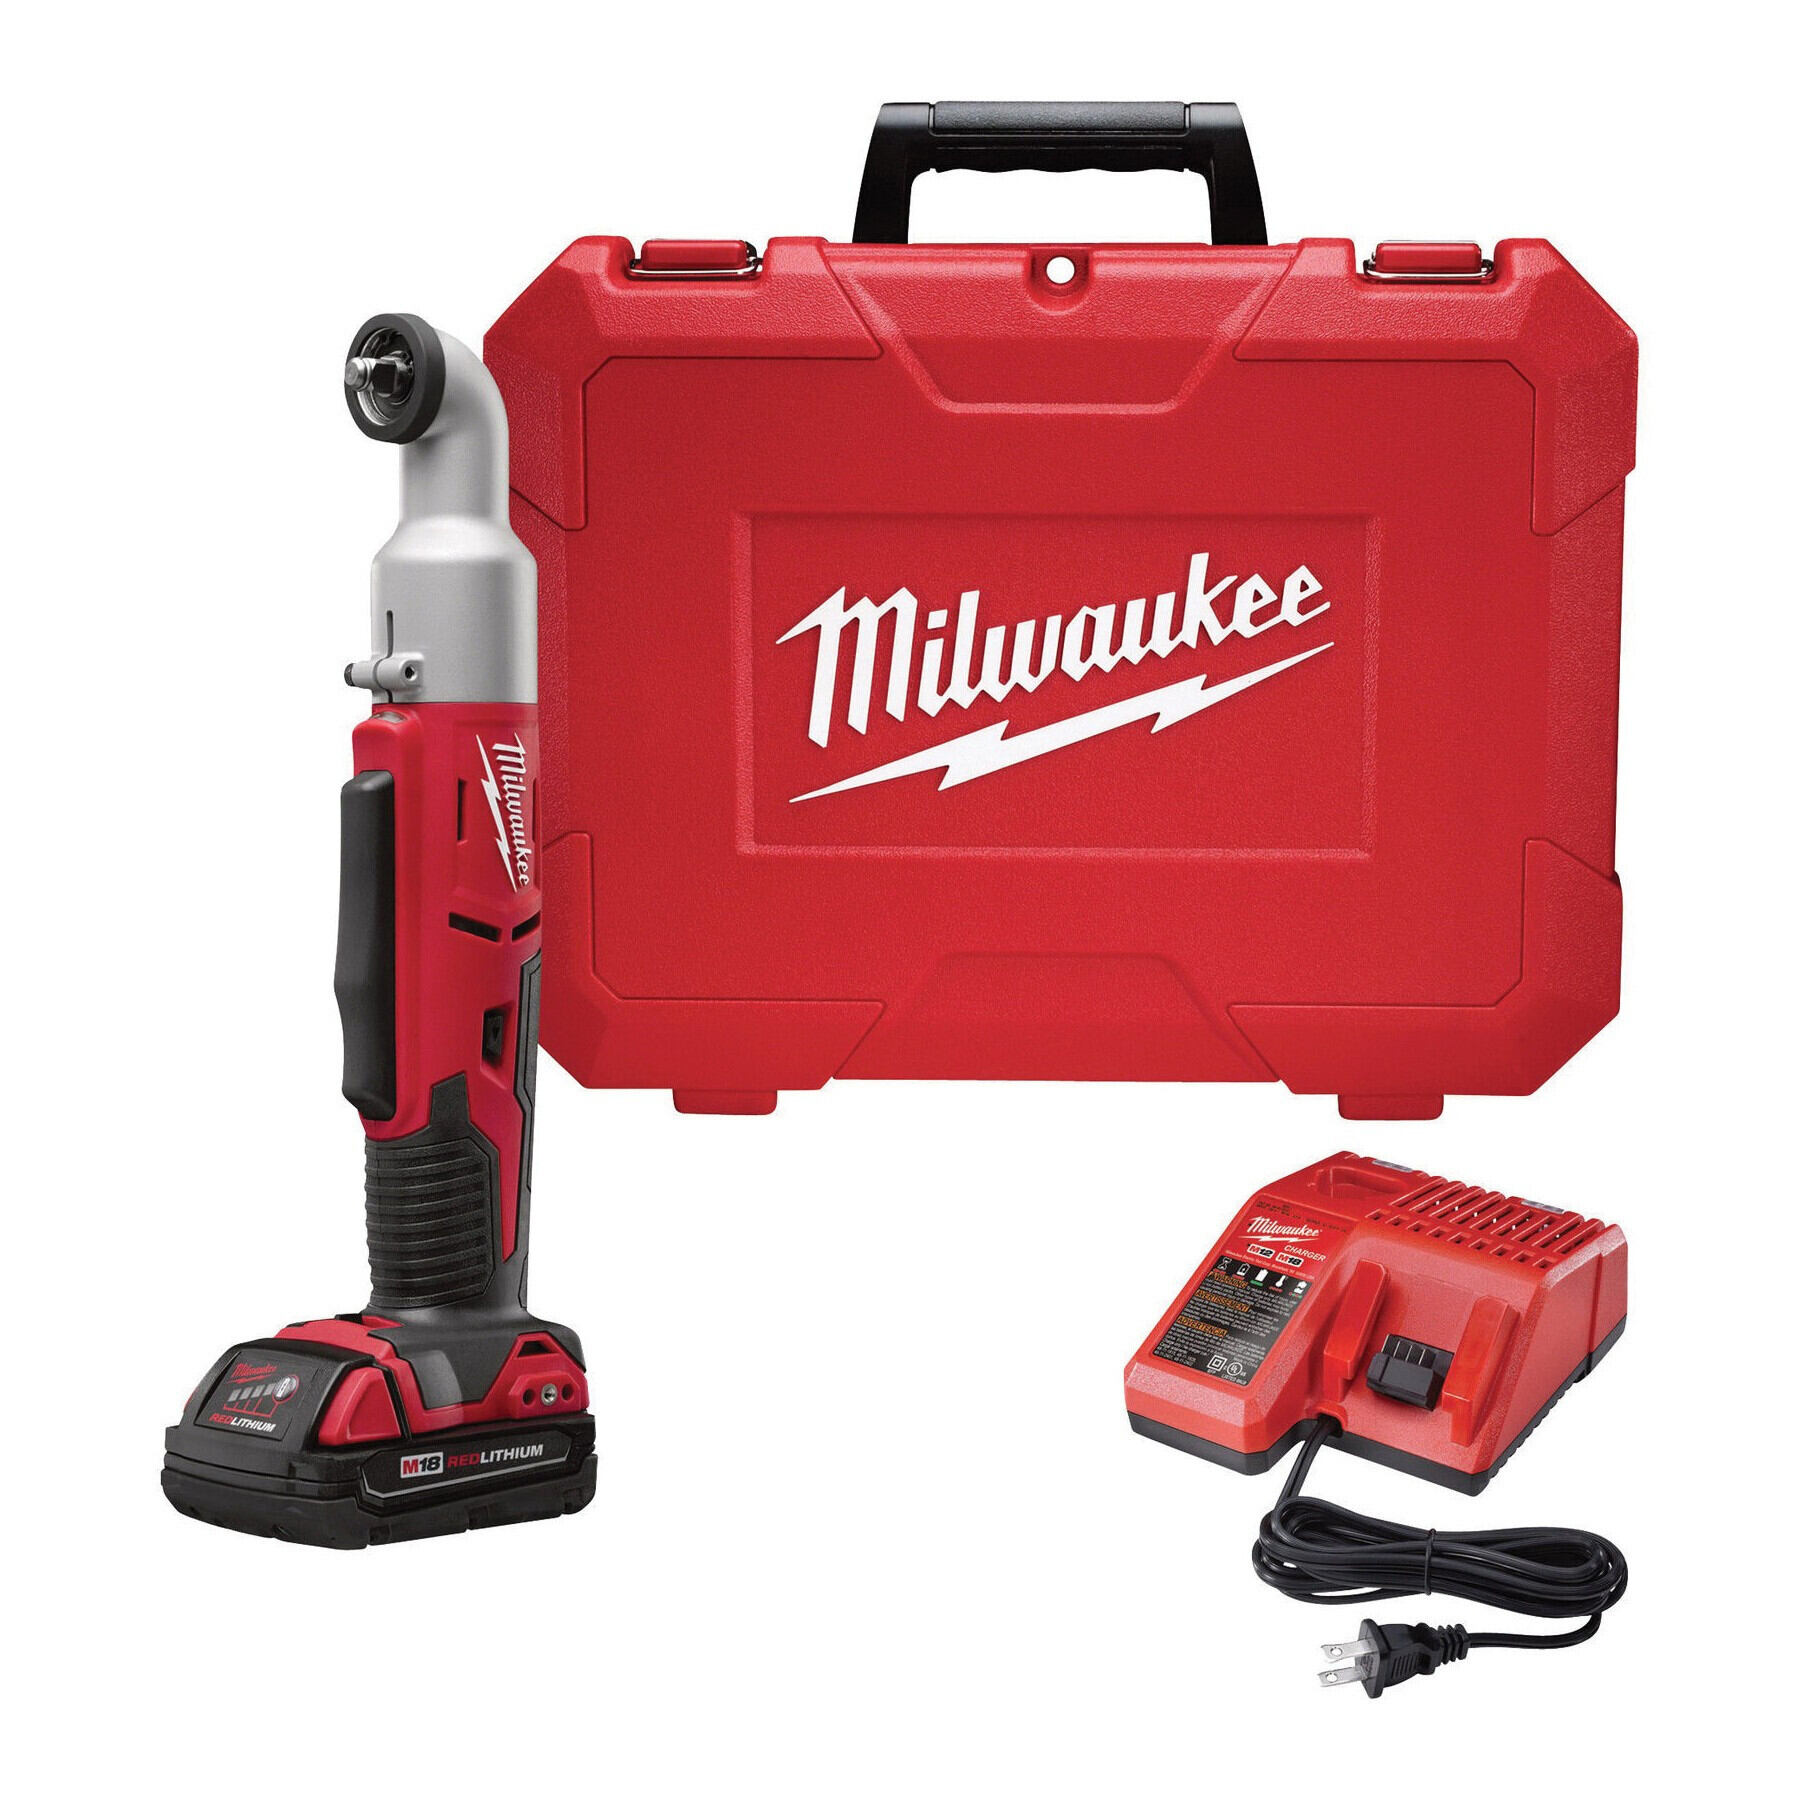 M18 FUEL™ 1” SDS Plus Rotary Hammer with Dedicated Dust Extractor Kit